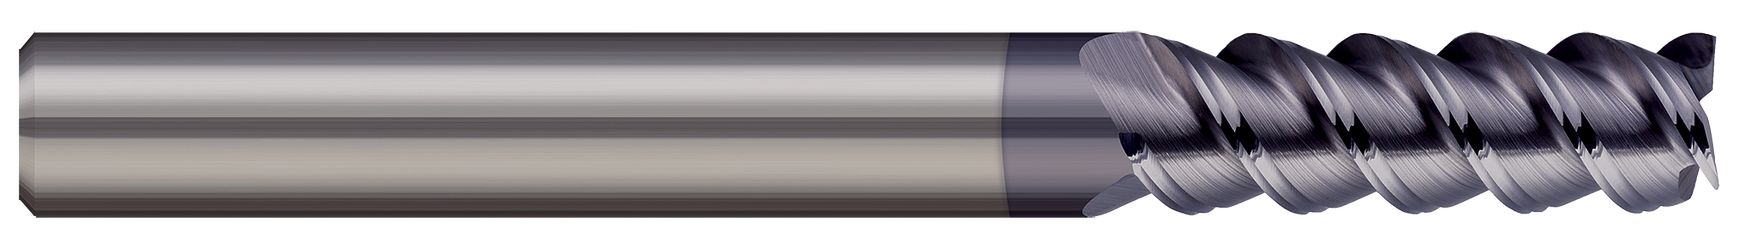 End Mills for Steels & High Temperature Alloys-Square-3 & 4 Flute 